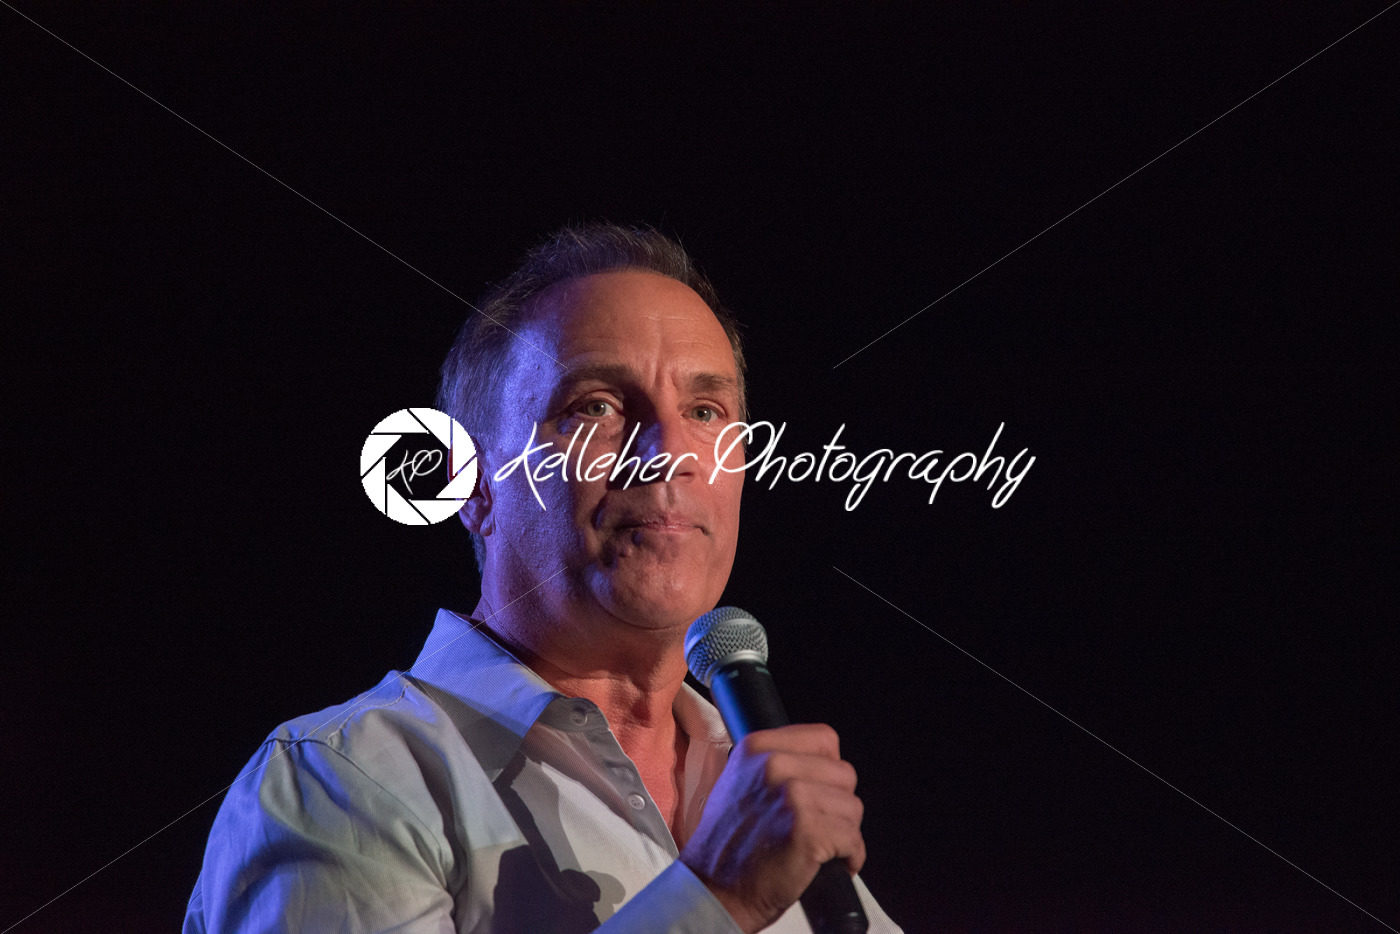 VALLEY FORGE CASINO, KING OF PRUSSIA, PA – JULY 15: Comedian Craig Shoemaker performing at Kendall’s Crusade fundraising event to raise awareness of Arteriovenus Malformations AVM on July 15, 2017 - Kelleher Photography Store